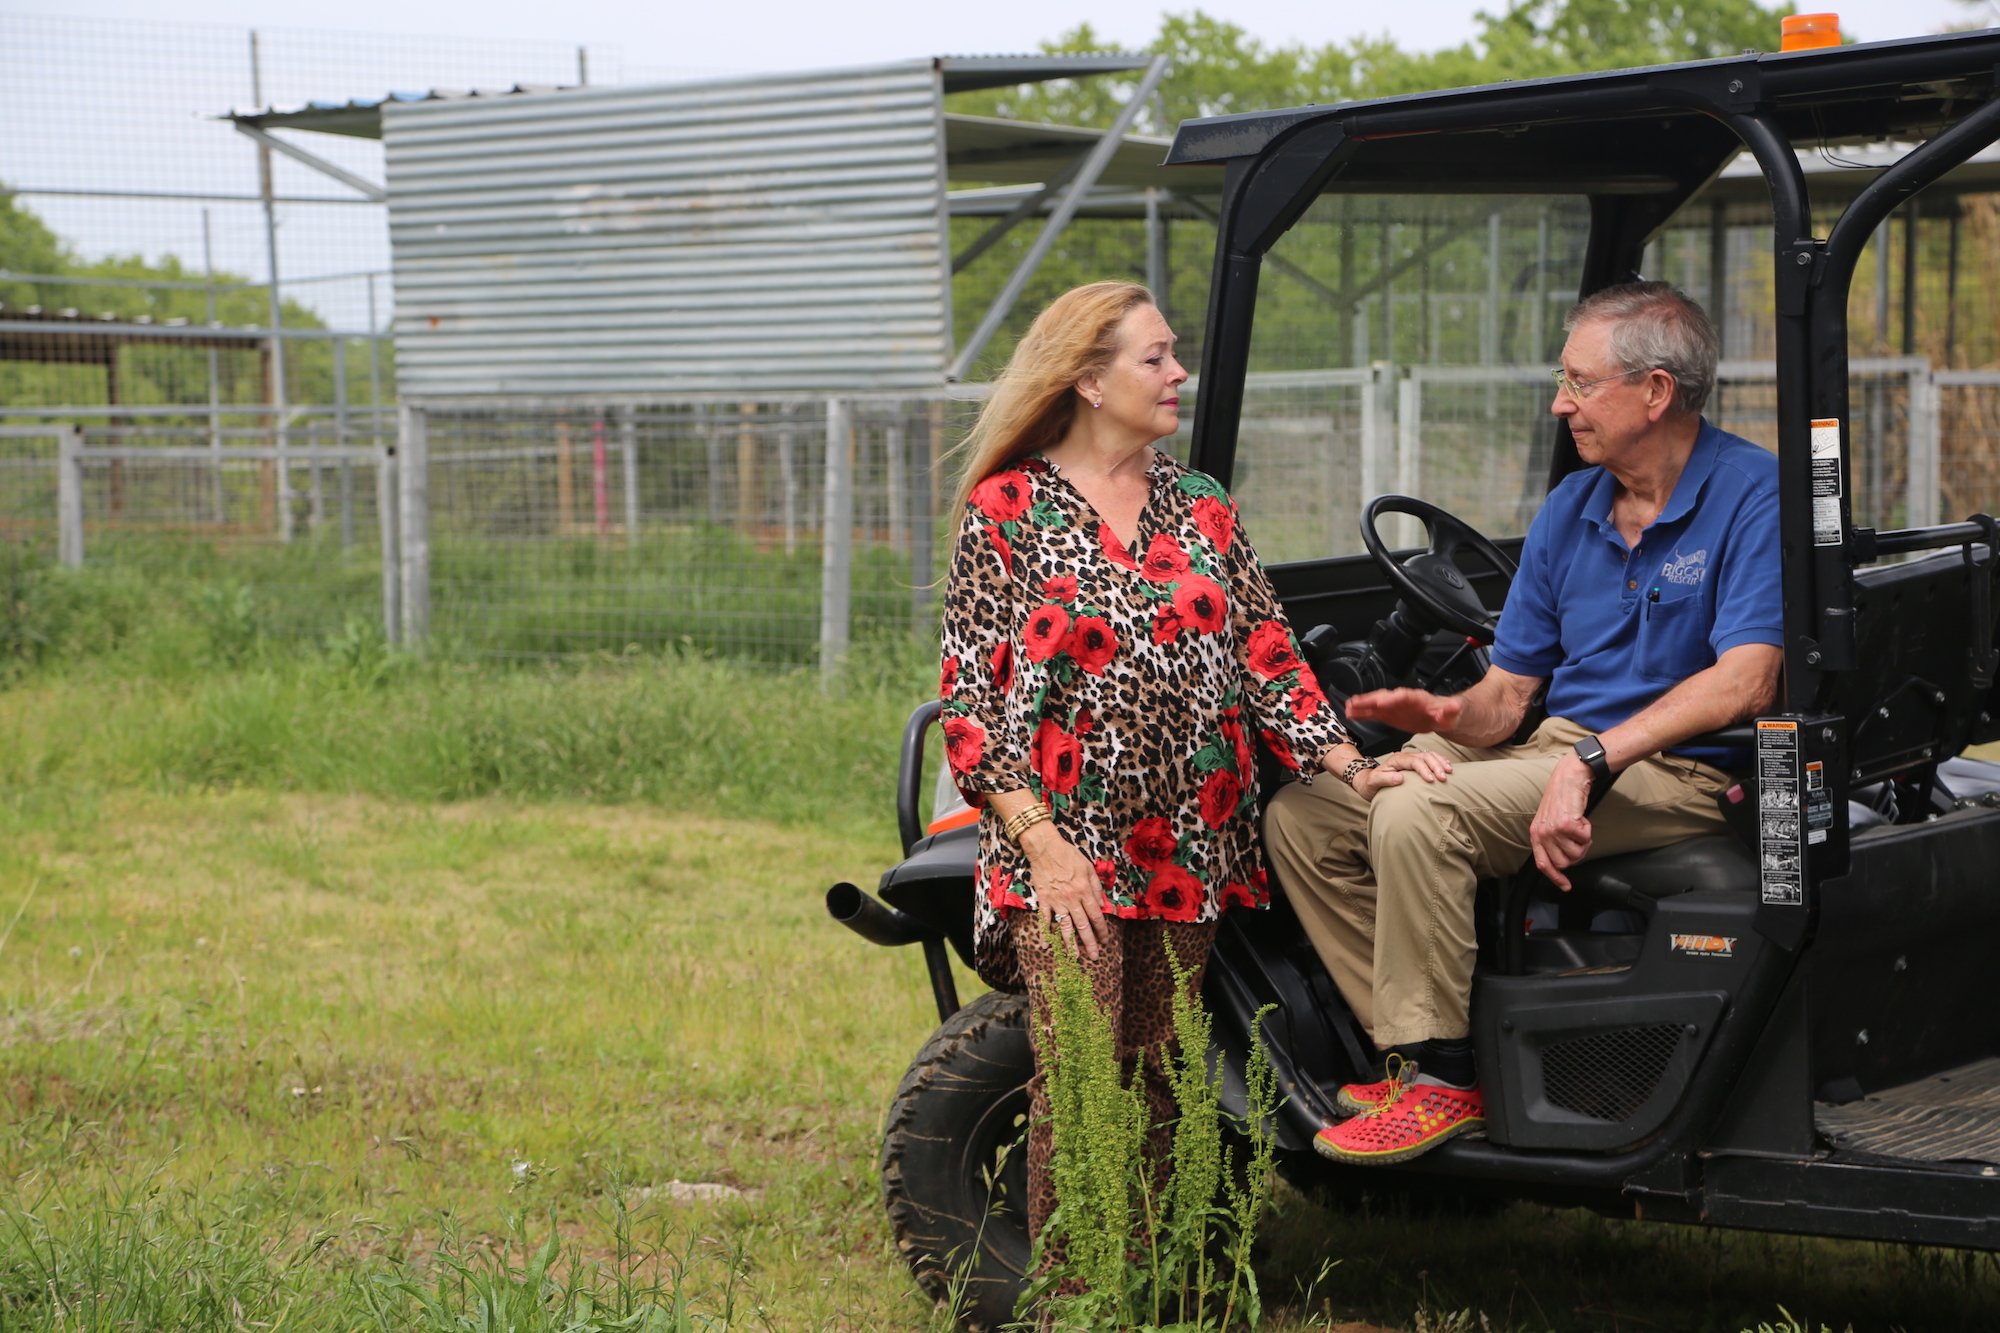 In GW Zoo, Carole Baskin puts her hand on Howard Baskin's knee as he sits on a tractor